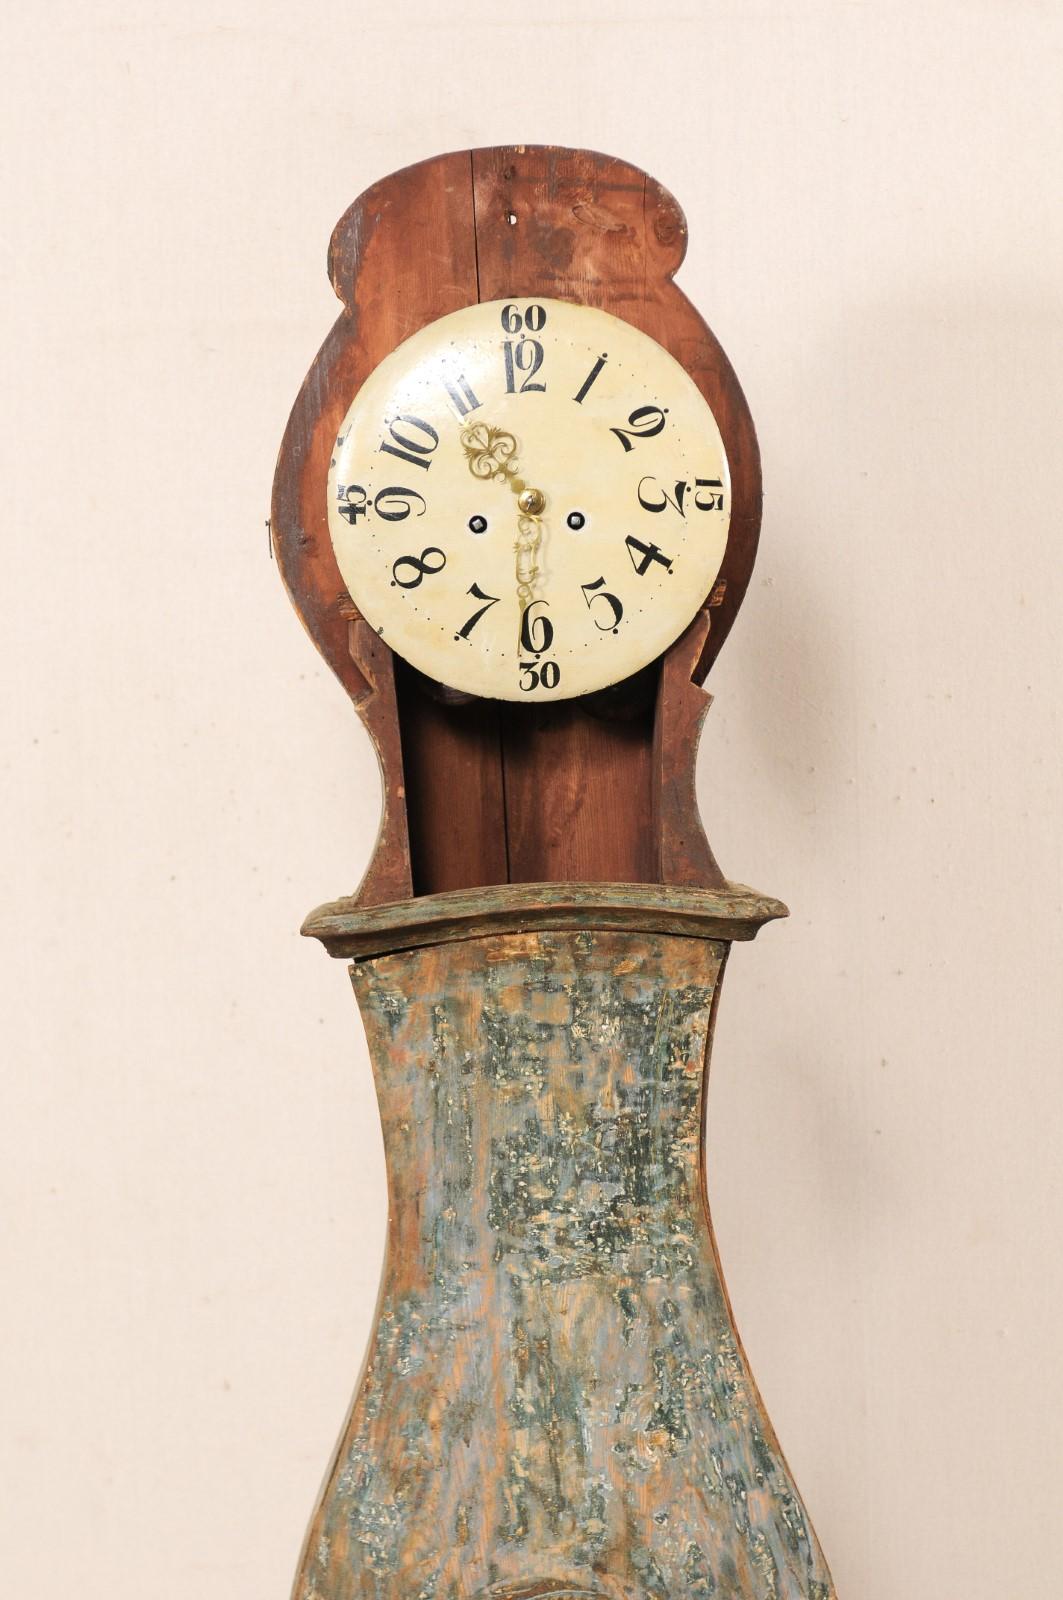 Exquisite 19th Century Swedish Wood Floor Clock with Wonderful Carved Accents 2